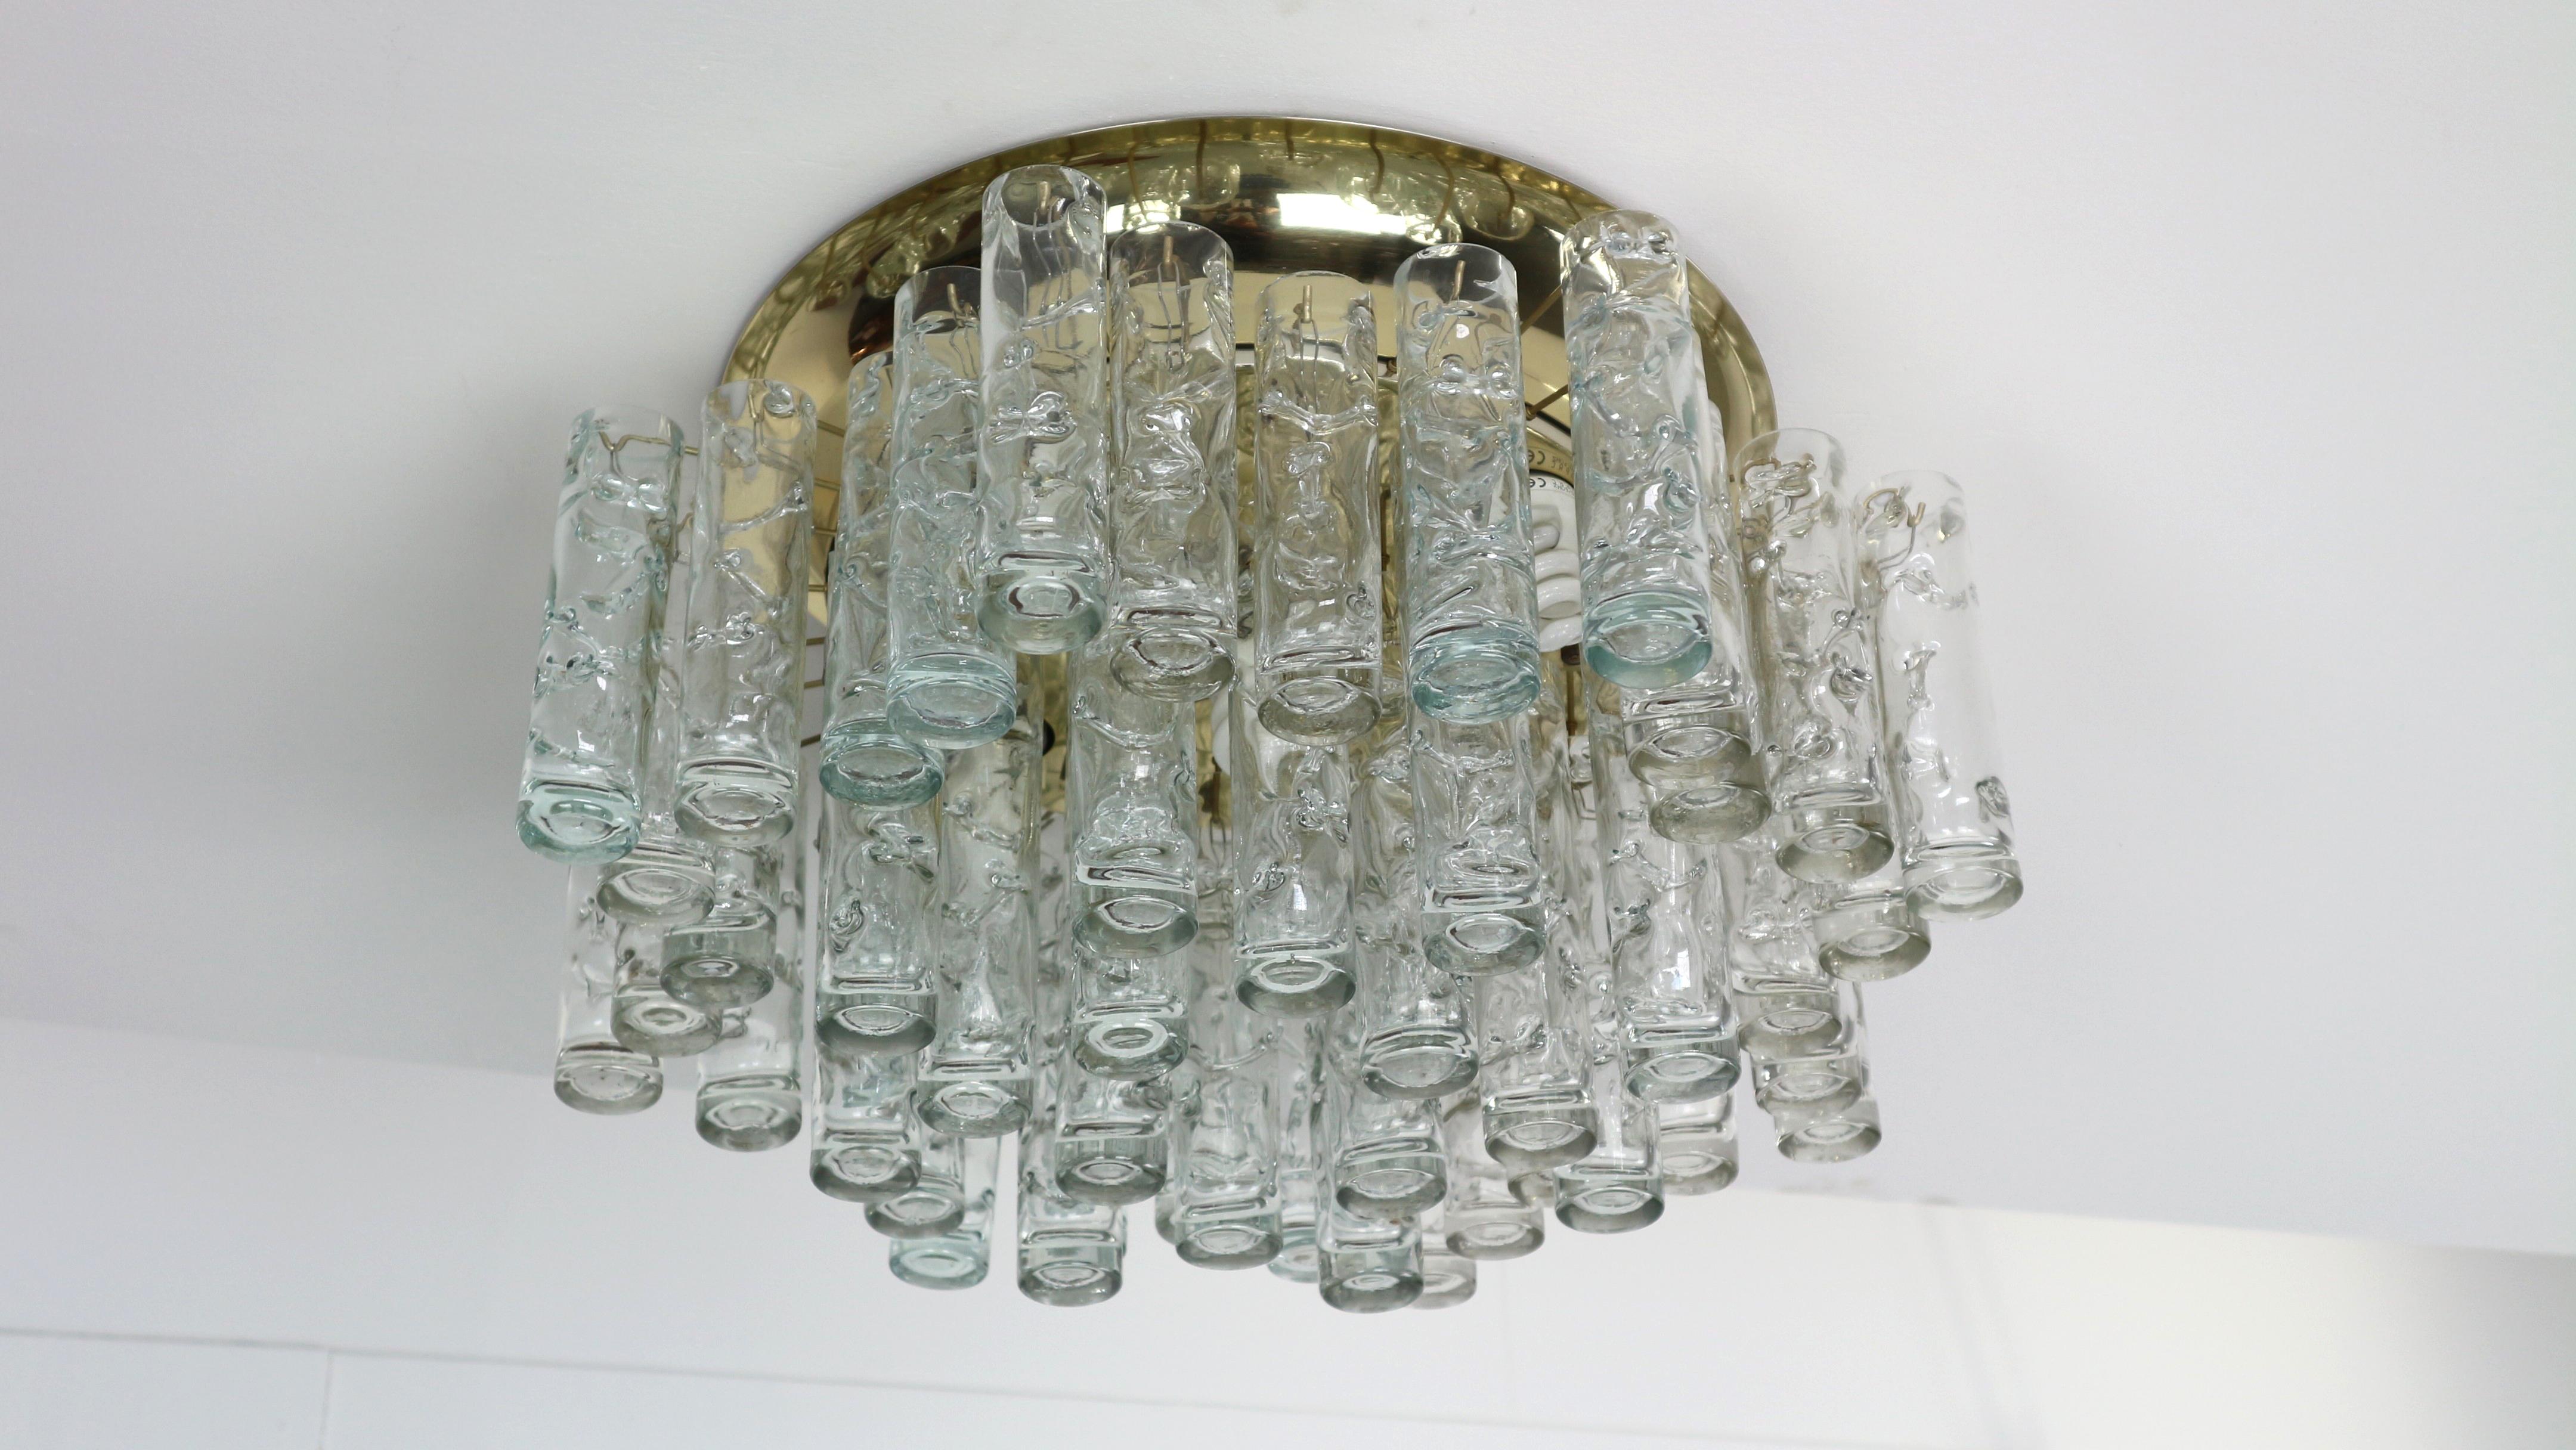 Fantastic midcentury chandelier by Doria, Germany, manufactured circa 1960-1969. 48 Murano glass cylinders suspended from the fixture.

Heavy quality and in very good condition. Cleaned, well-wired and ready to use.

 The fixture requires 5 x